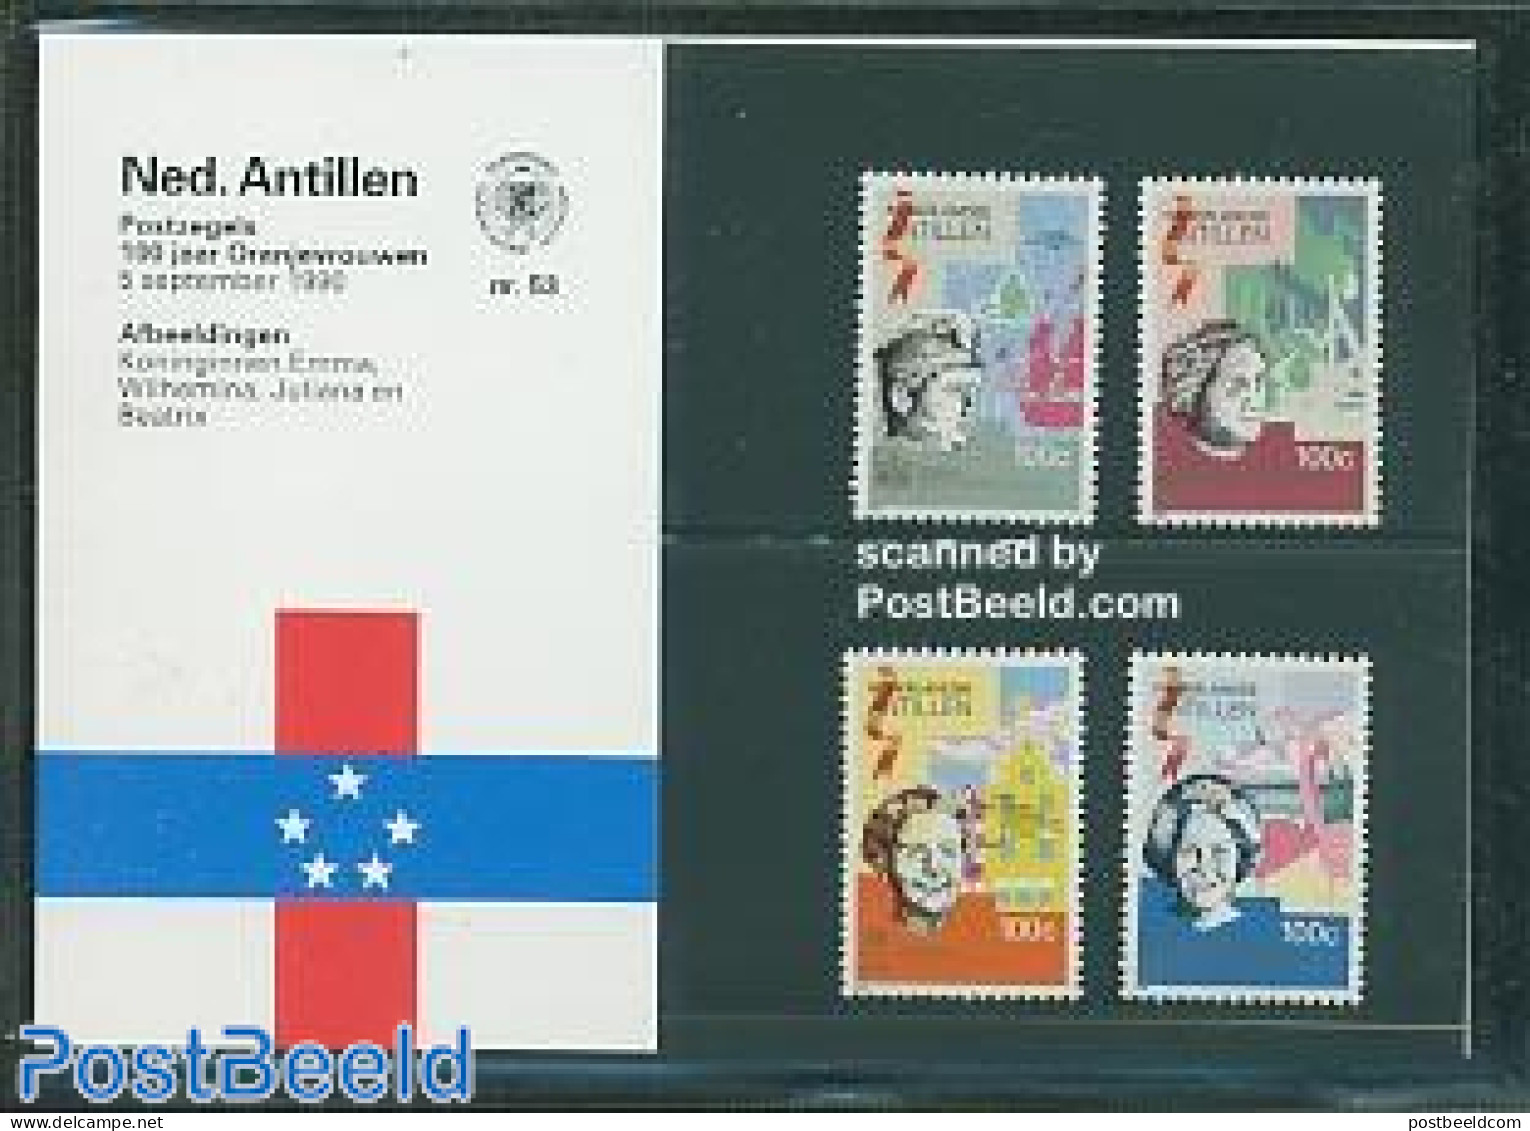 Netherlands Antilles 1990 Four Queens Presentation Pack 53, Mint NH, History - Various - Kings & Queens (Royalty) - Maps - Royalties, Royals